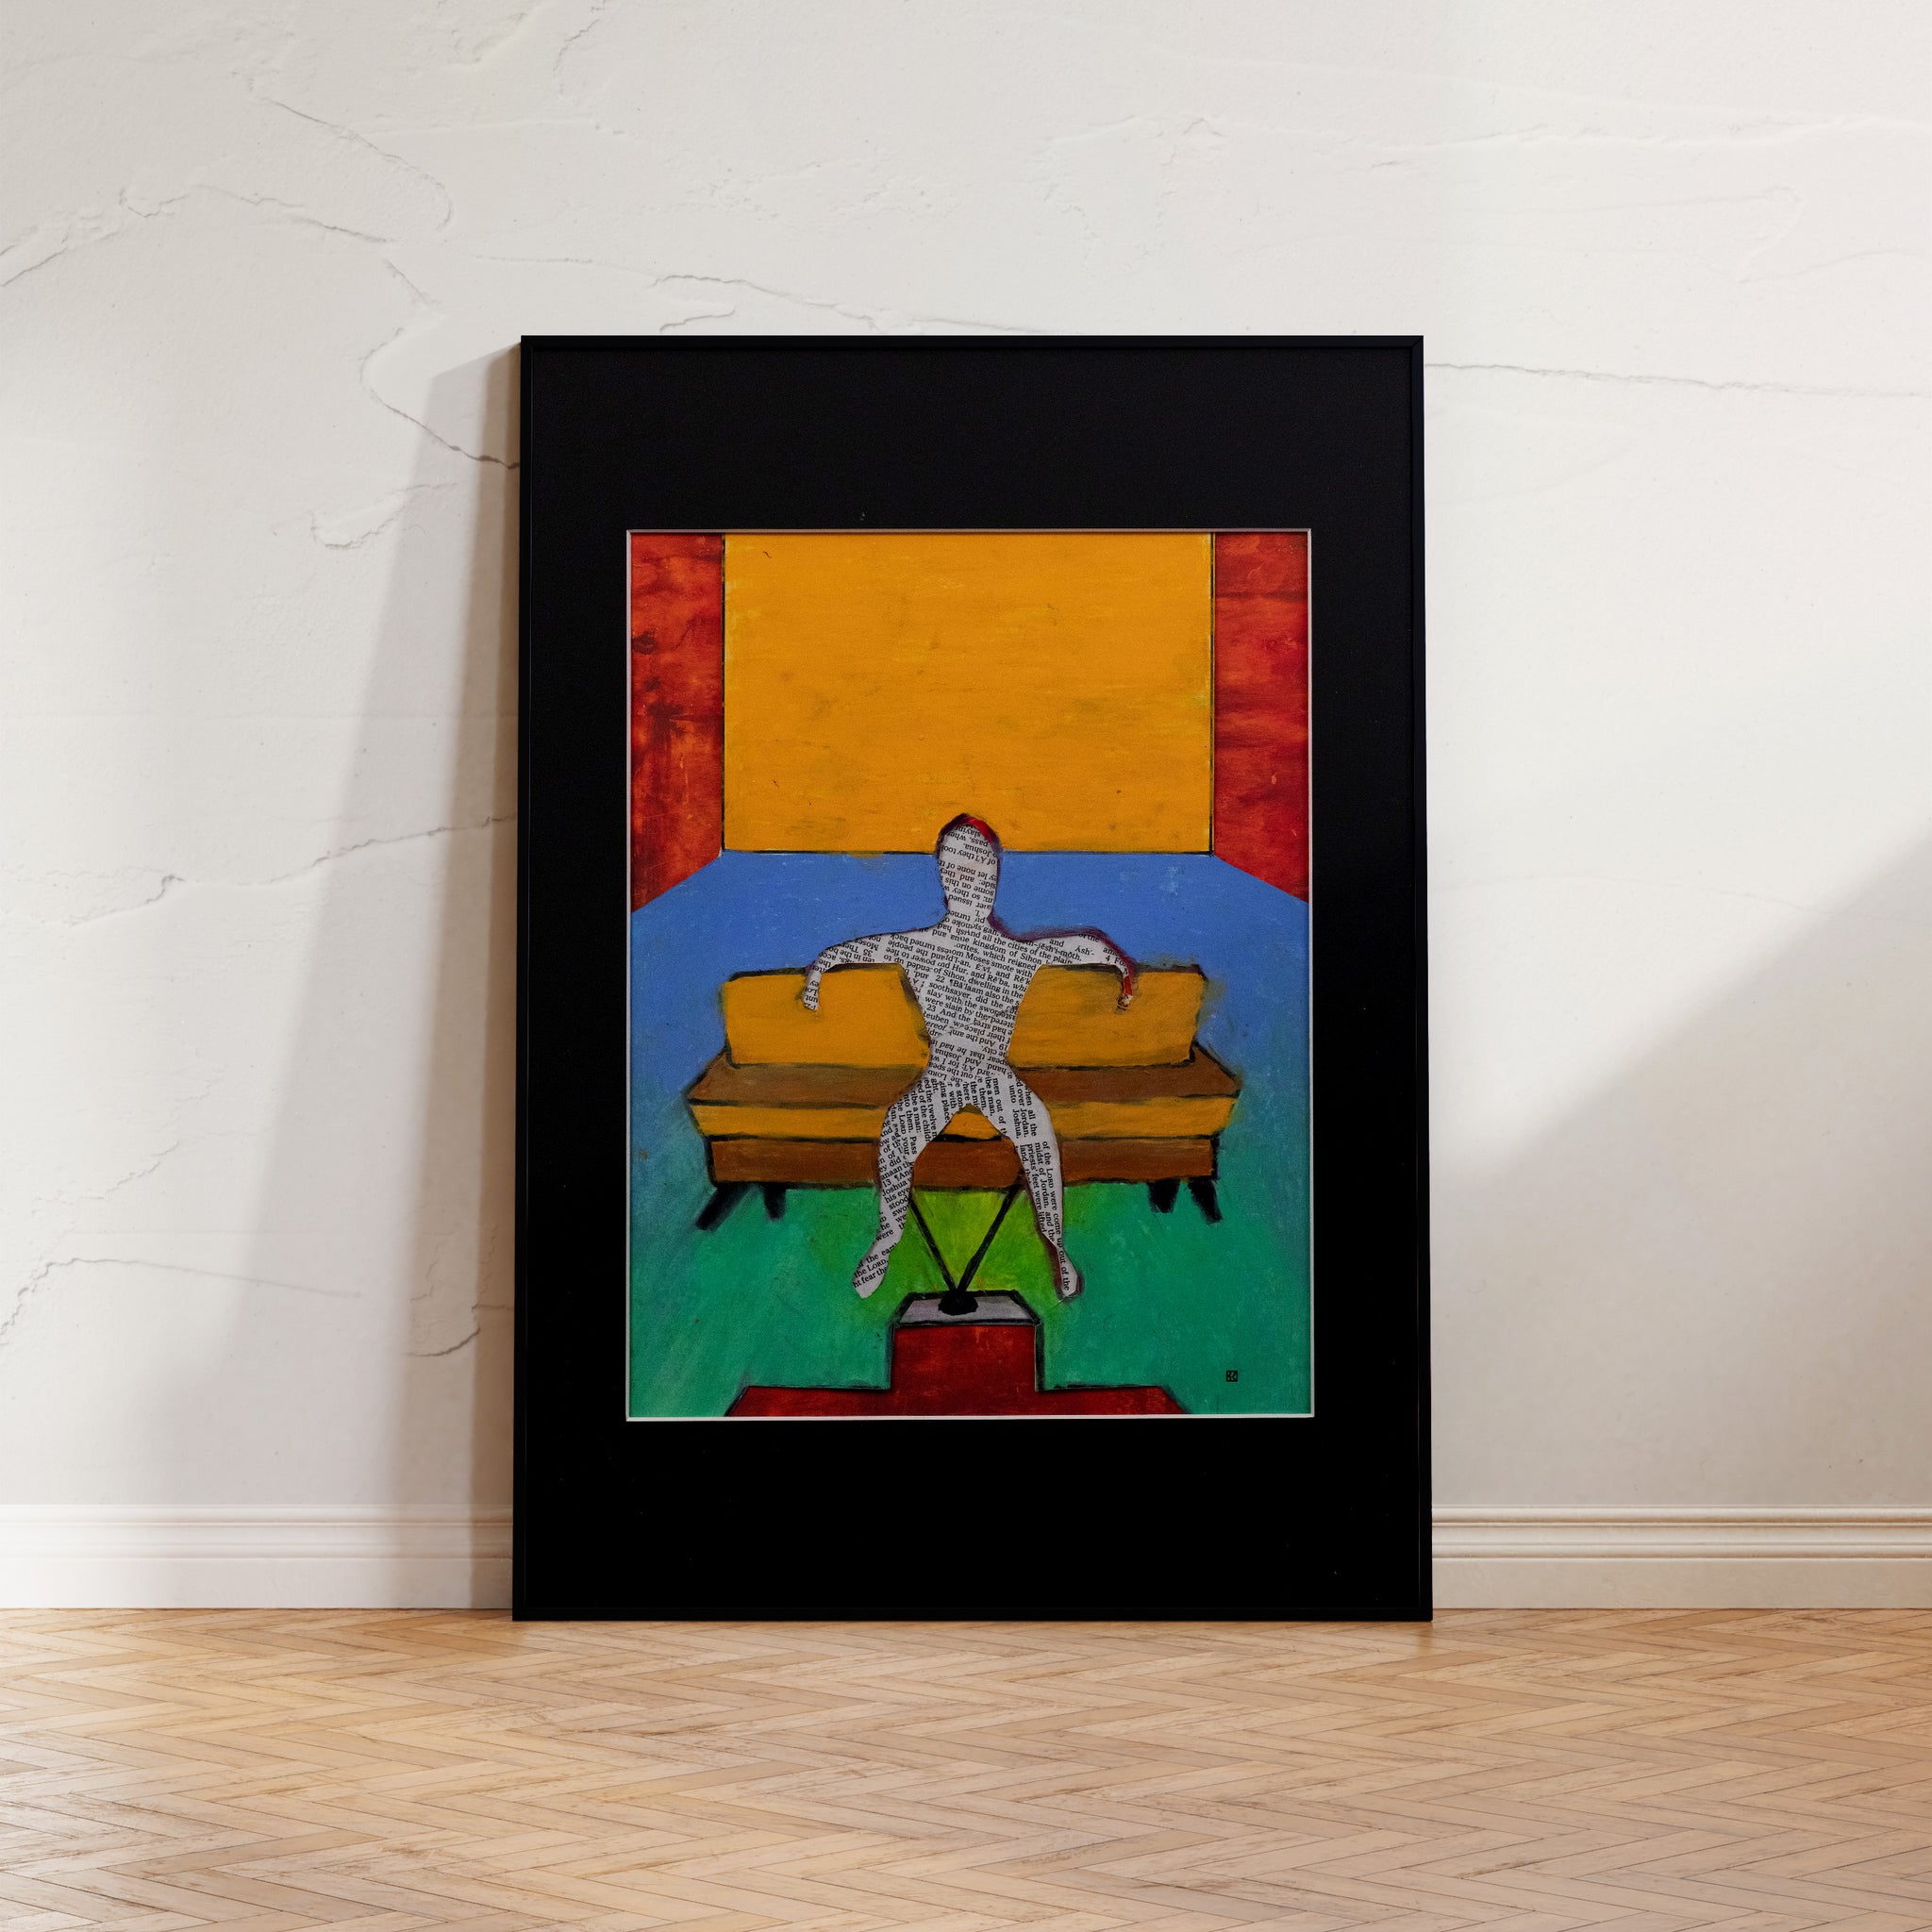 "Contemplative Living Room," a mixed-media artwork depicting a lone figure engrossed in a television's red cross-shaped glow, stimulating curiosity and reflection about everyday life.